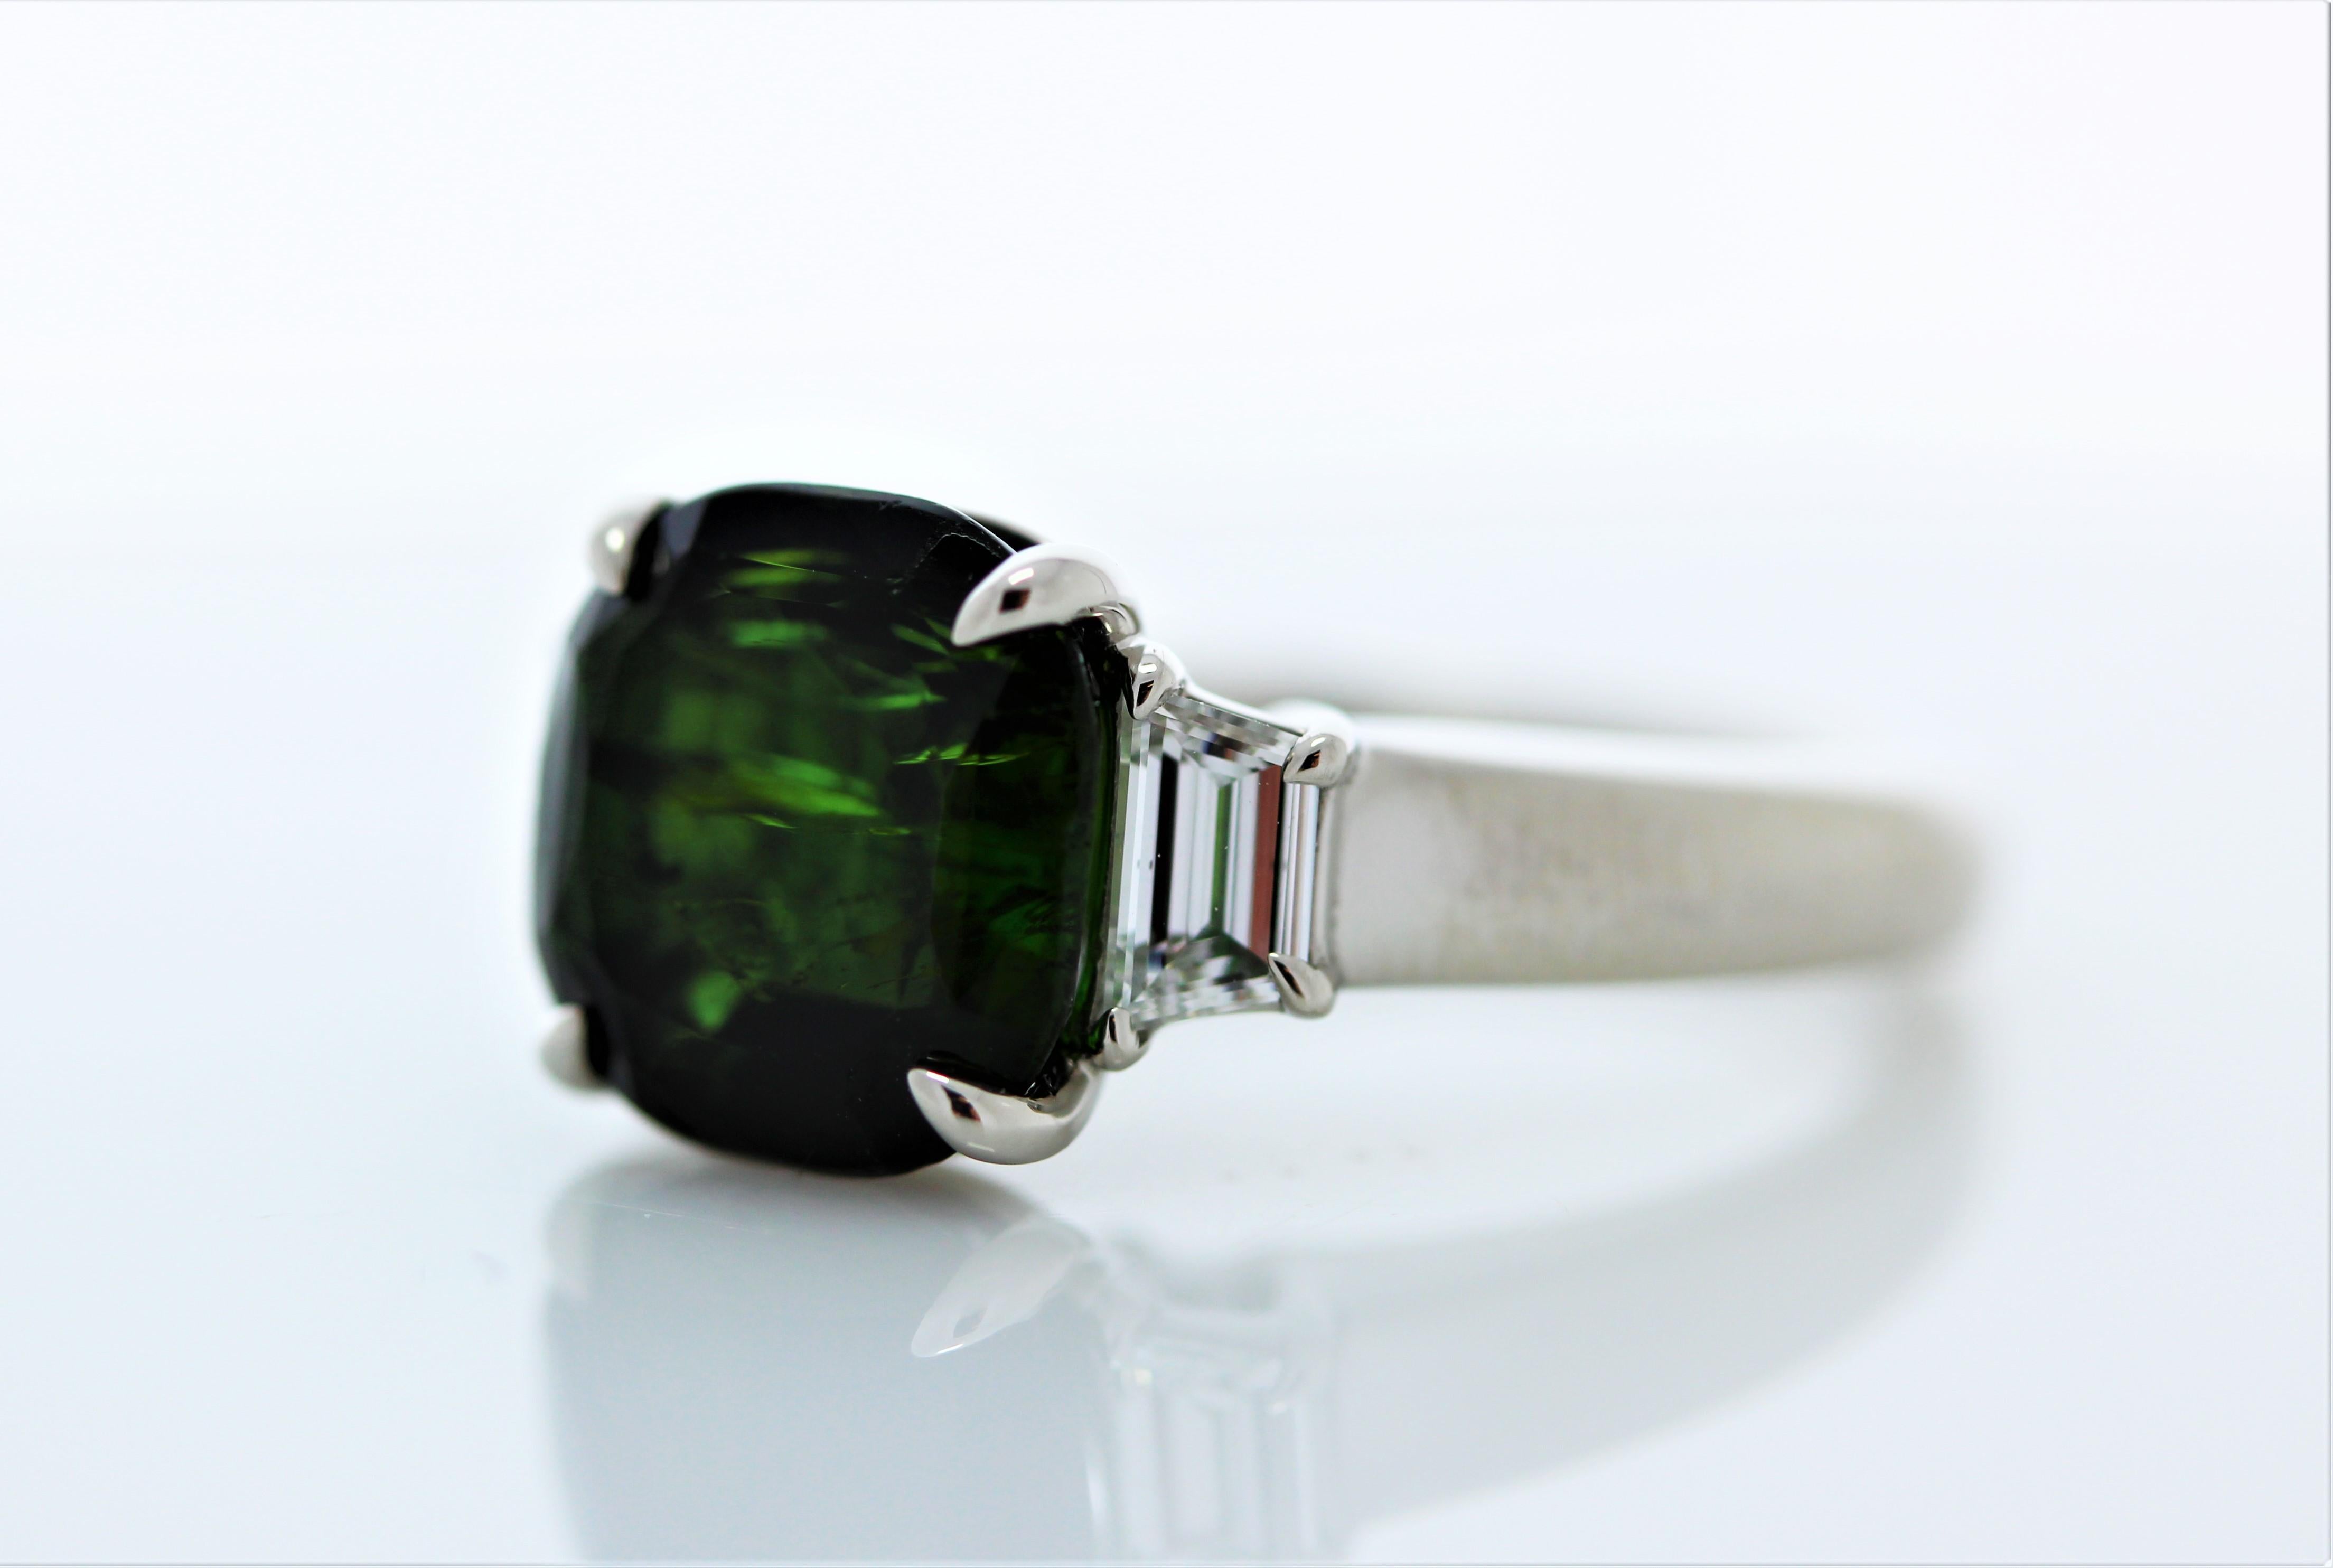 This ravishing green hued tourmaline ring is an incredible sight to behold! The ring features a dynamic 4.56carat tourmaline gemstone. On either side of the gemstone, sit perfectly matched trapezoid cut diamonds that total 0.51 carats. This ring is